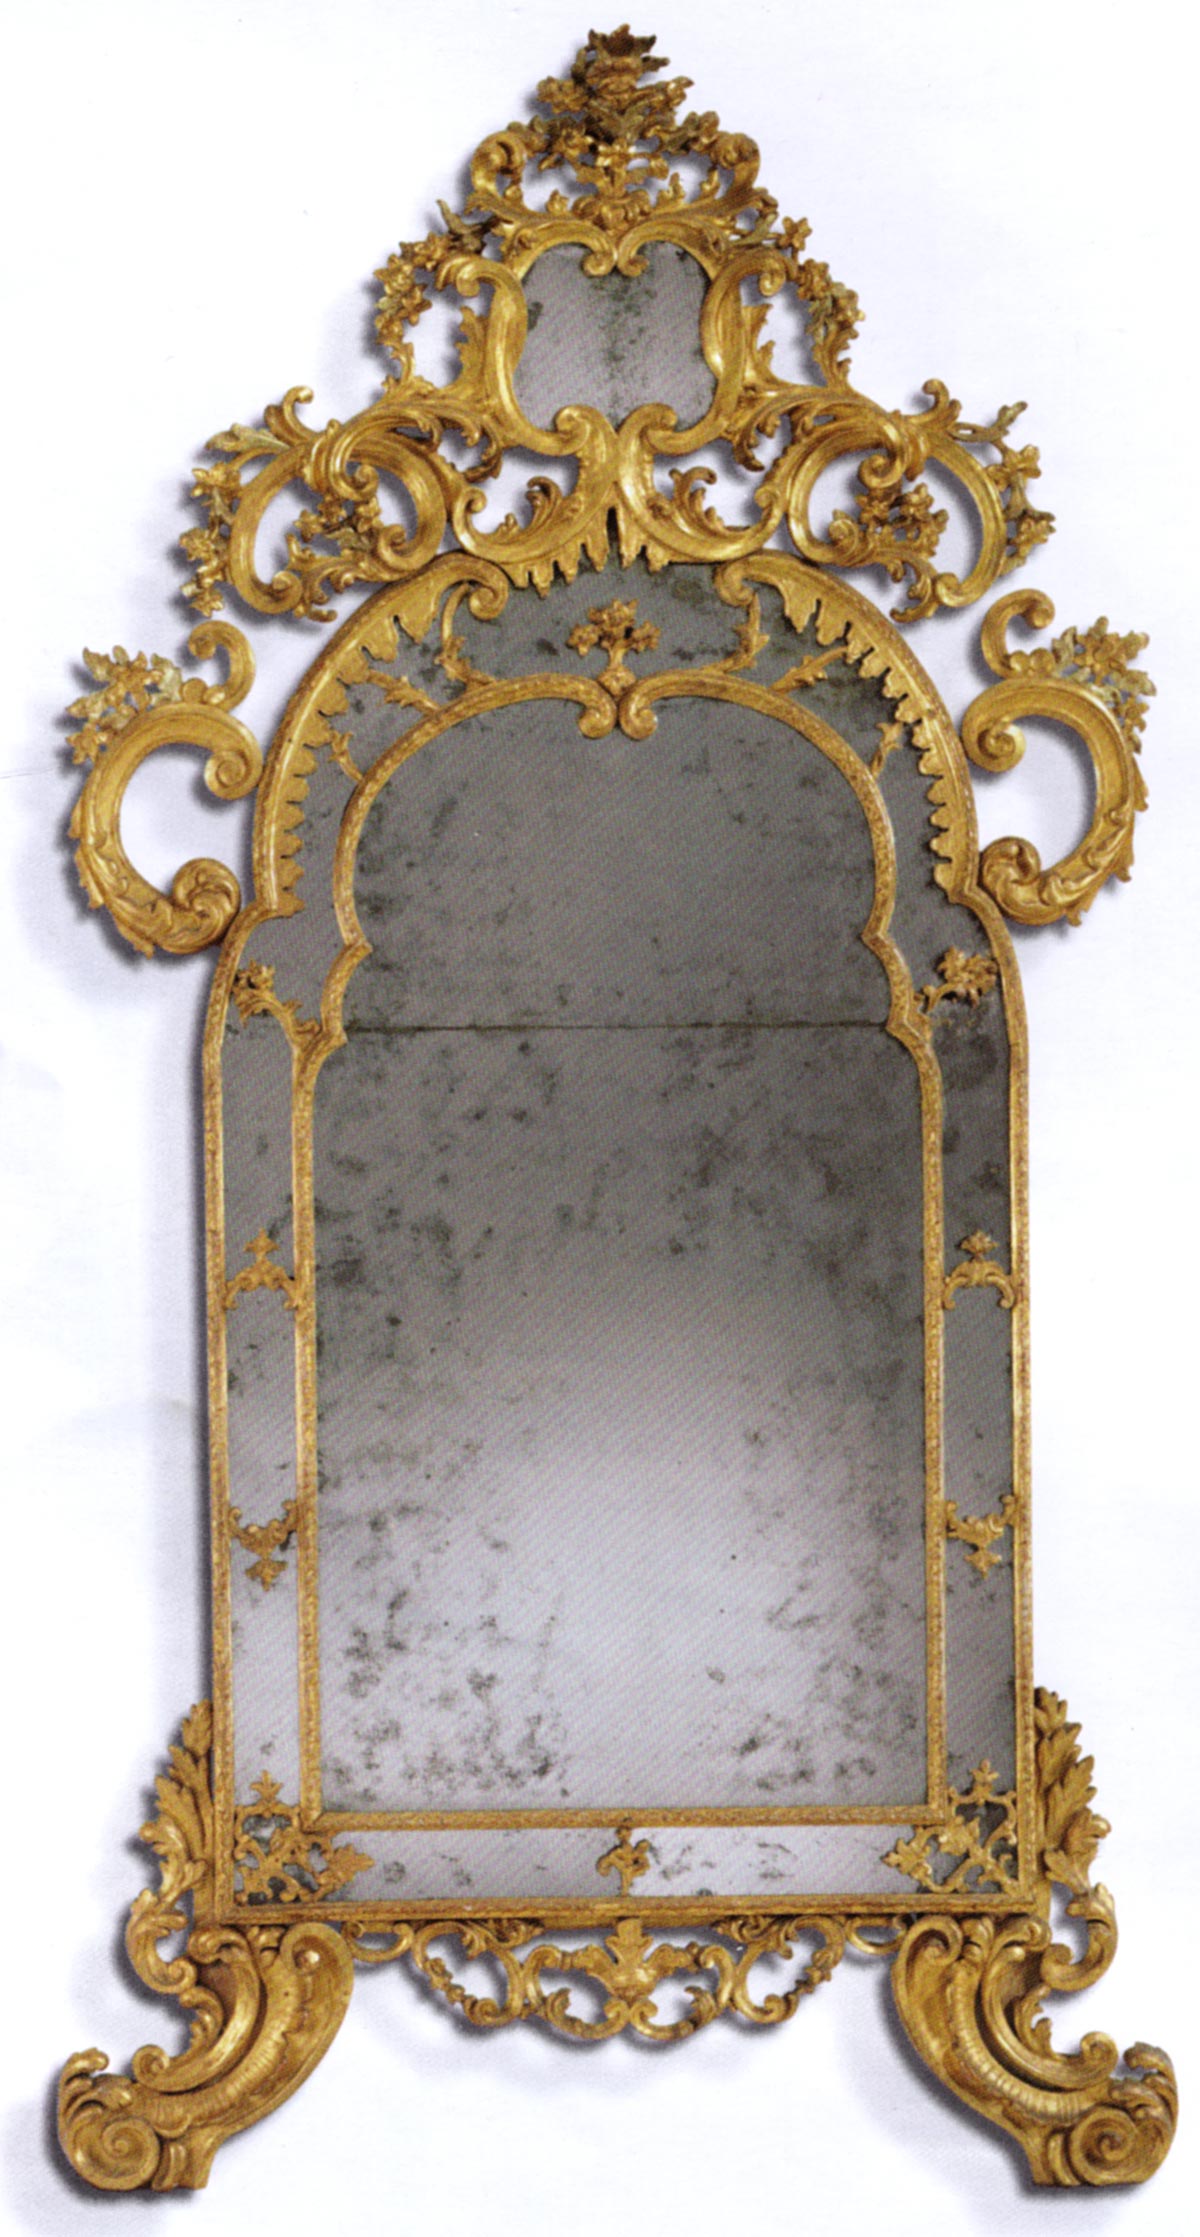 Very fine, Italian, giltwood mirror of large dimensions